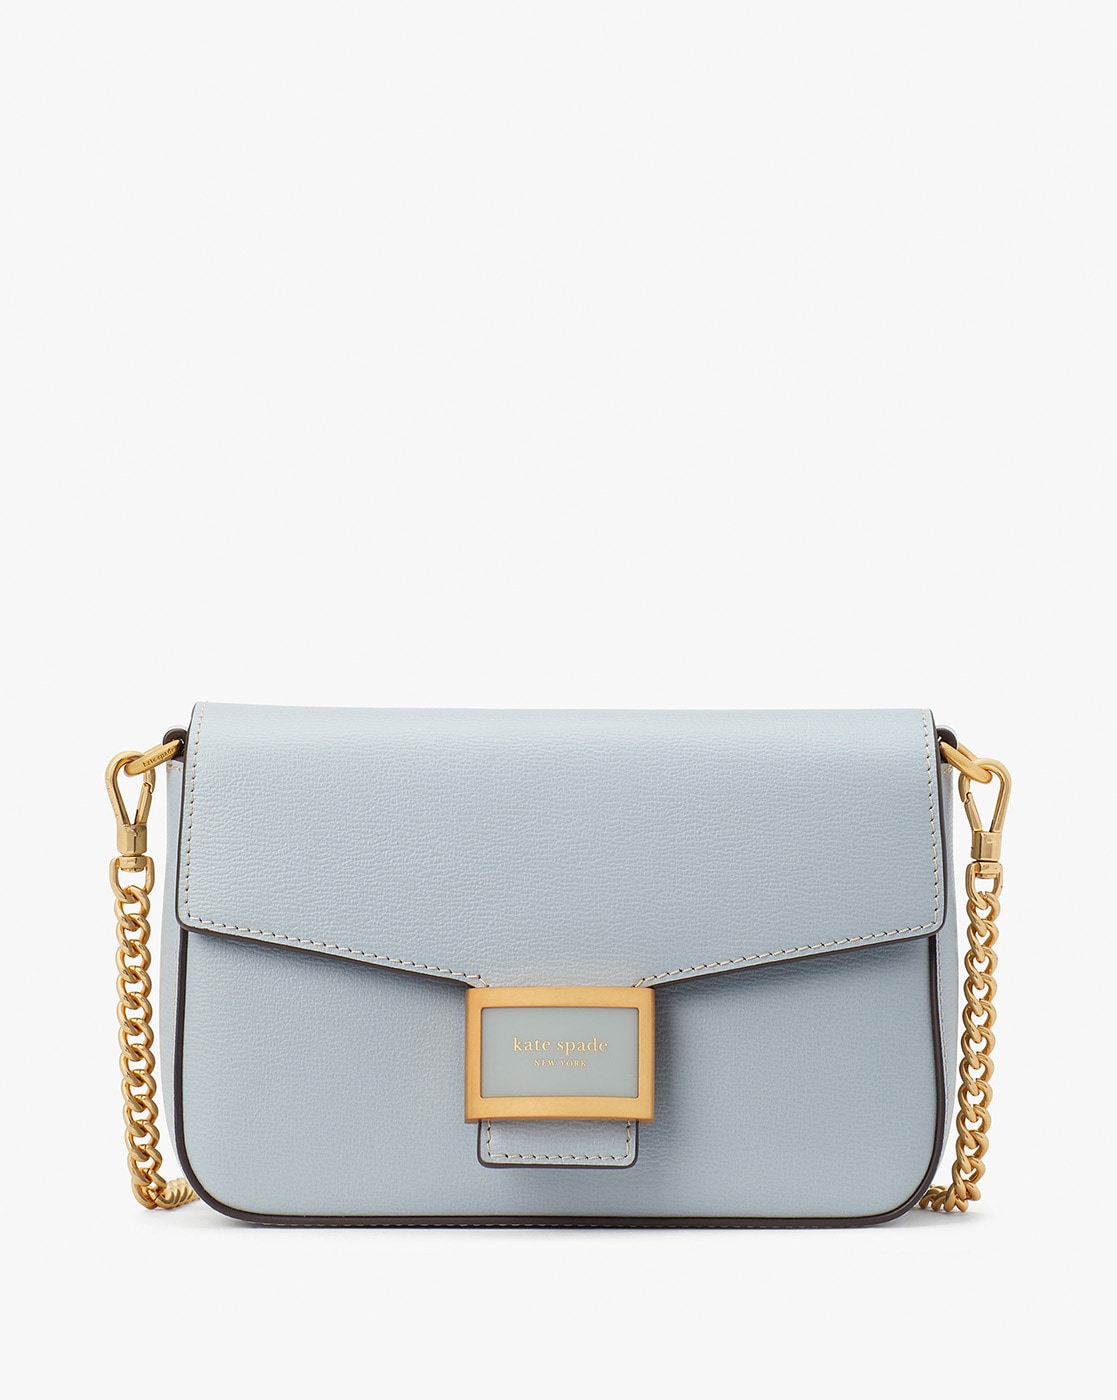 KATE SPADE Katy Textured Leather Flap Chain Crossbody Bag For Women (Blue, OS)